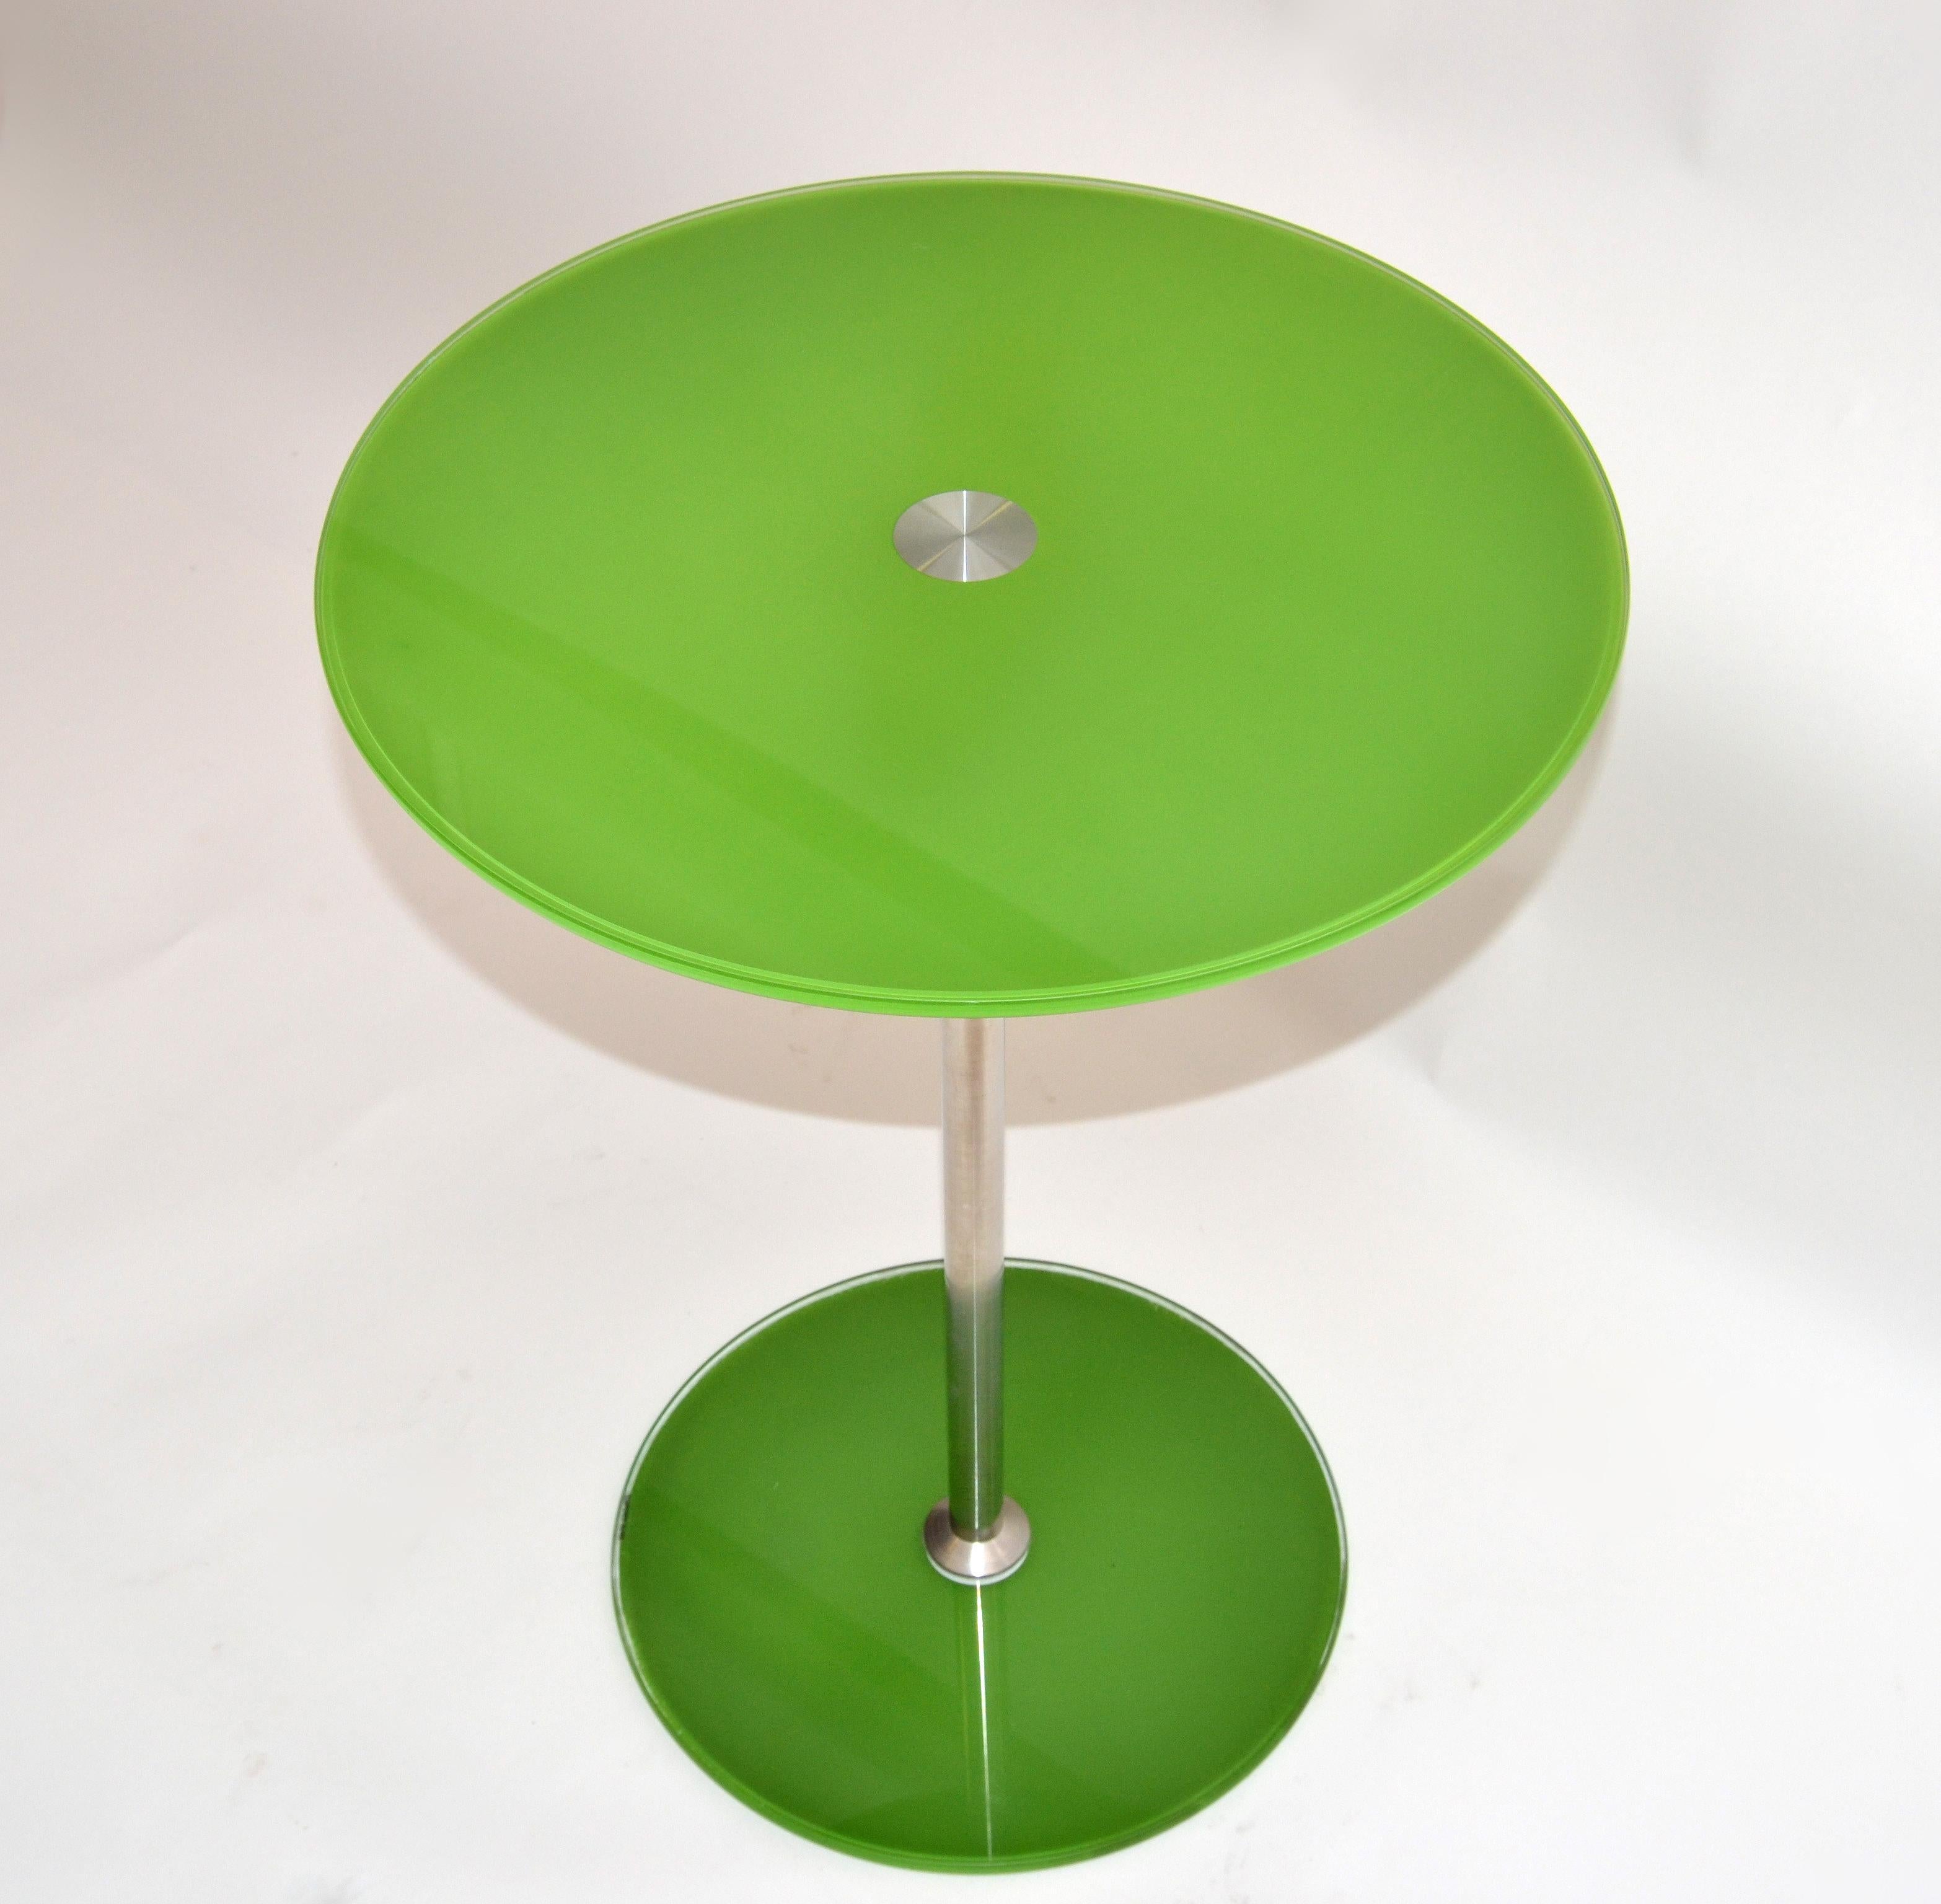 Modern adjustable green tempered glass and brushed steel side table, bistro table.
Can be adjusted from the lowest height of 18.25 inches to the max. height of 30 inches.
Marked Tempered Glass at the base.